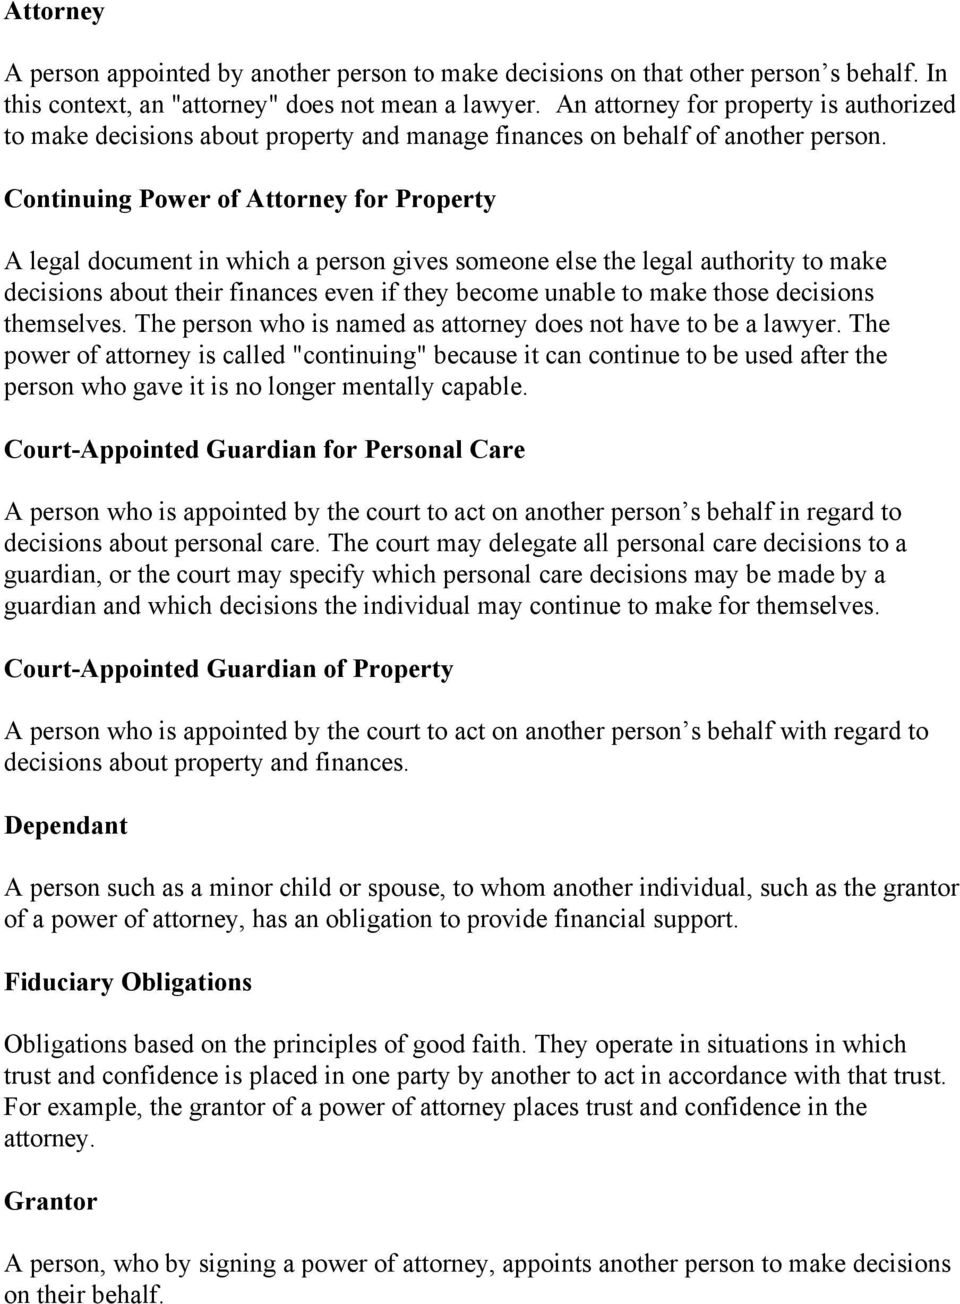 Continuing Power of Attorney for Property A legal document in which a person gives someone else the legal authority to make decisions about their finances even if they become unable to make those